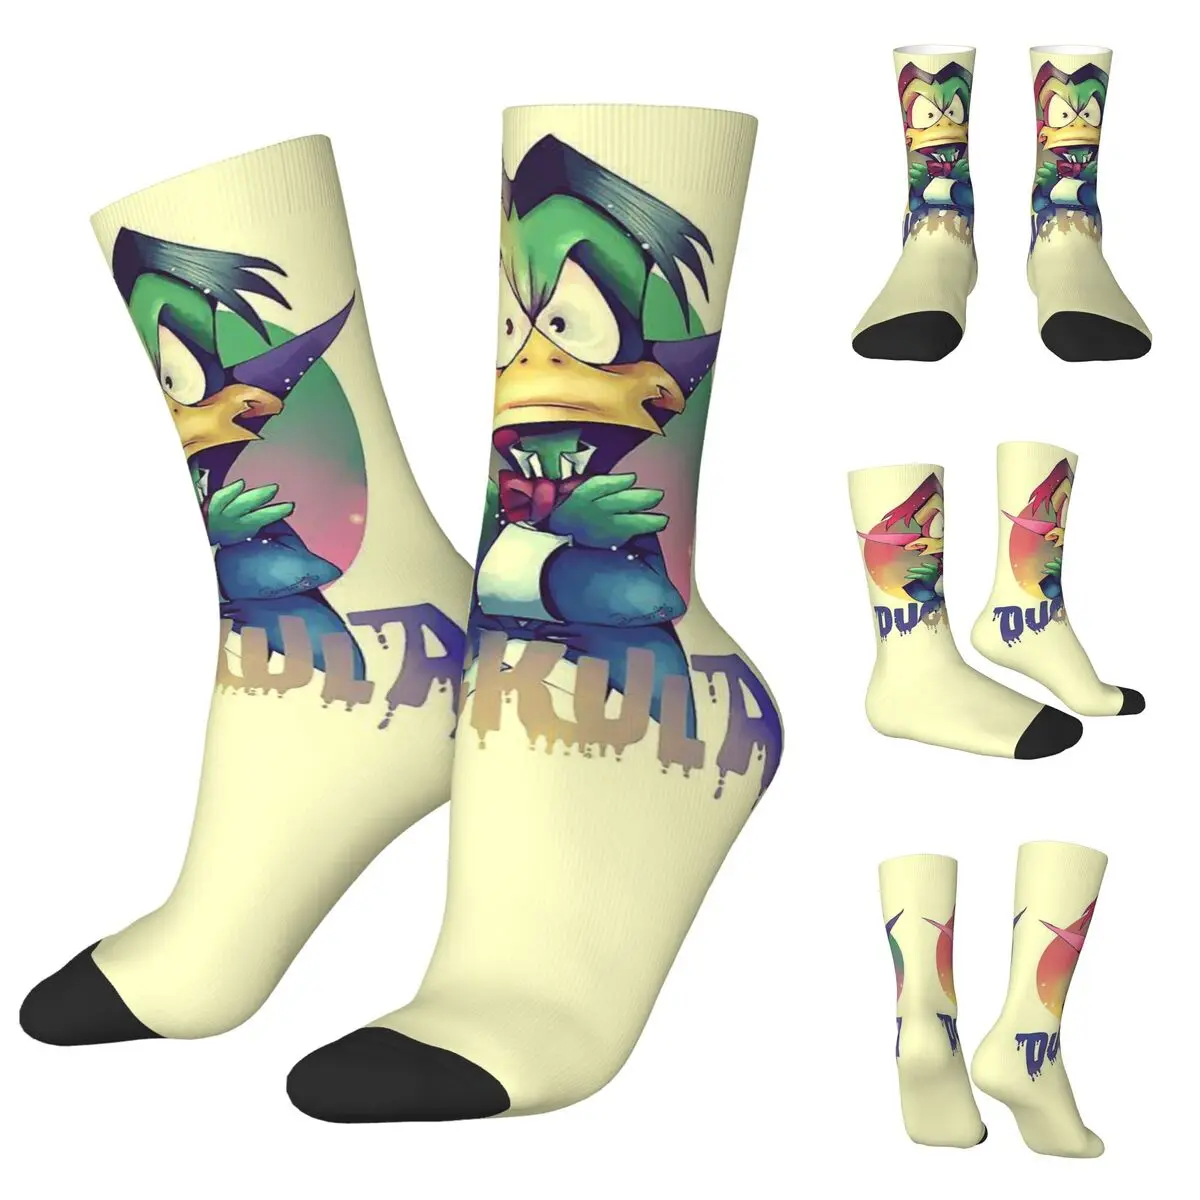 Count Duckula Vampire Lord The Castle Straight cosy Unisex Socks,Running Happy 3D printing Socks,Street Style Crazy Sock colorful pair best friends tv show cosy unisex socks hip hop happy 3d printing socks street style crazy sock